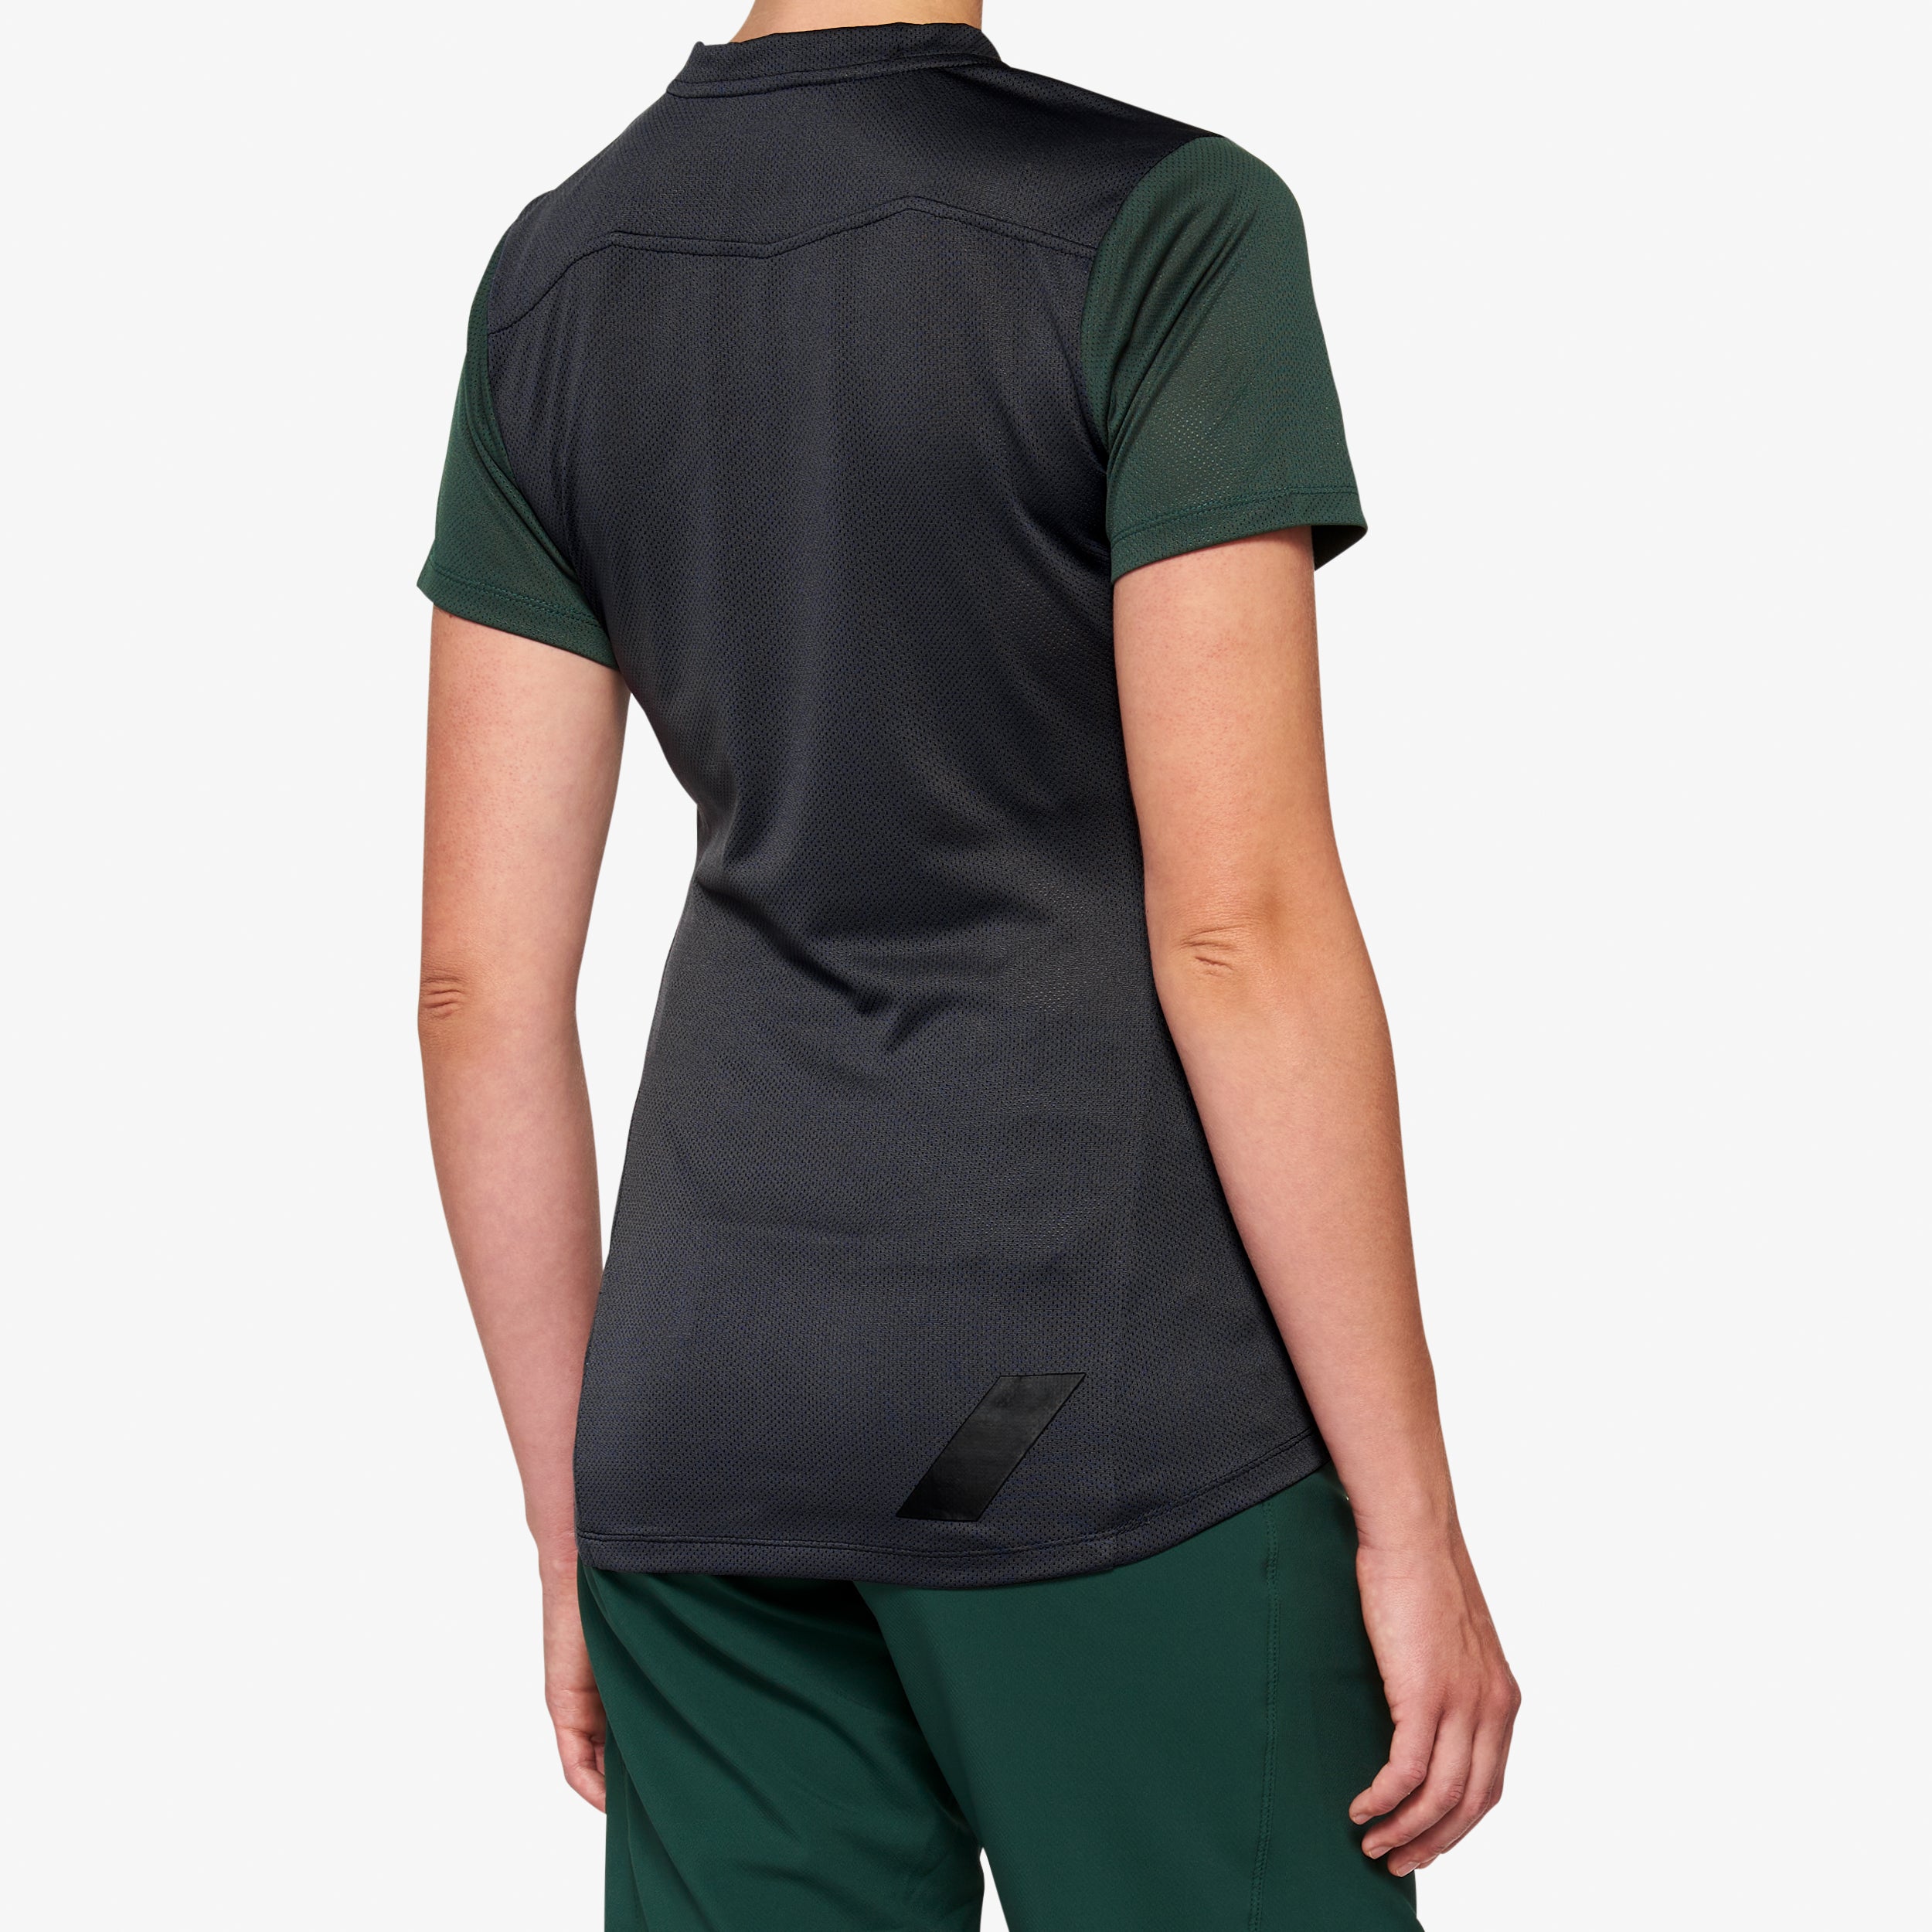 RIDECAMP Women's Short Sleeve Jersey Charcoal/Forest Green - Secondary